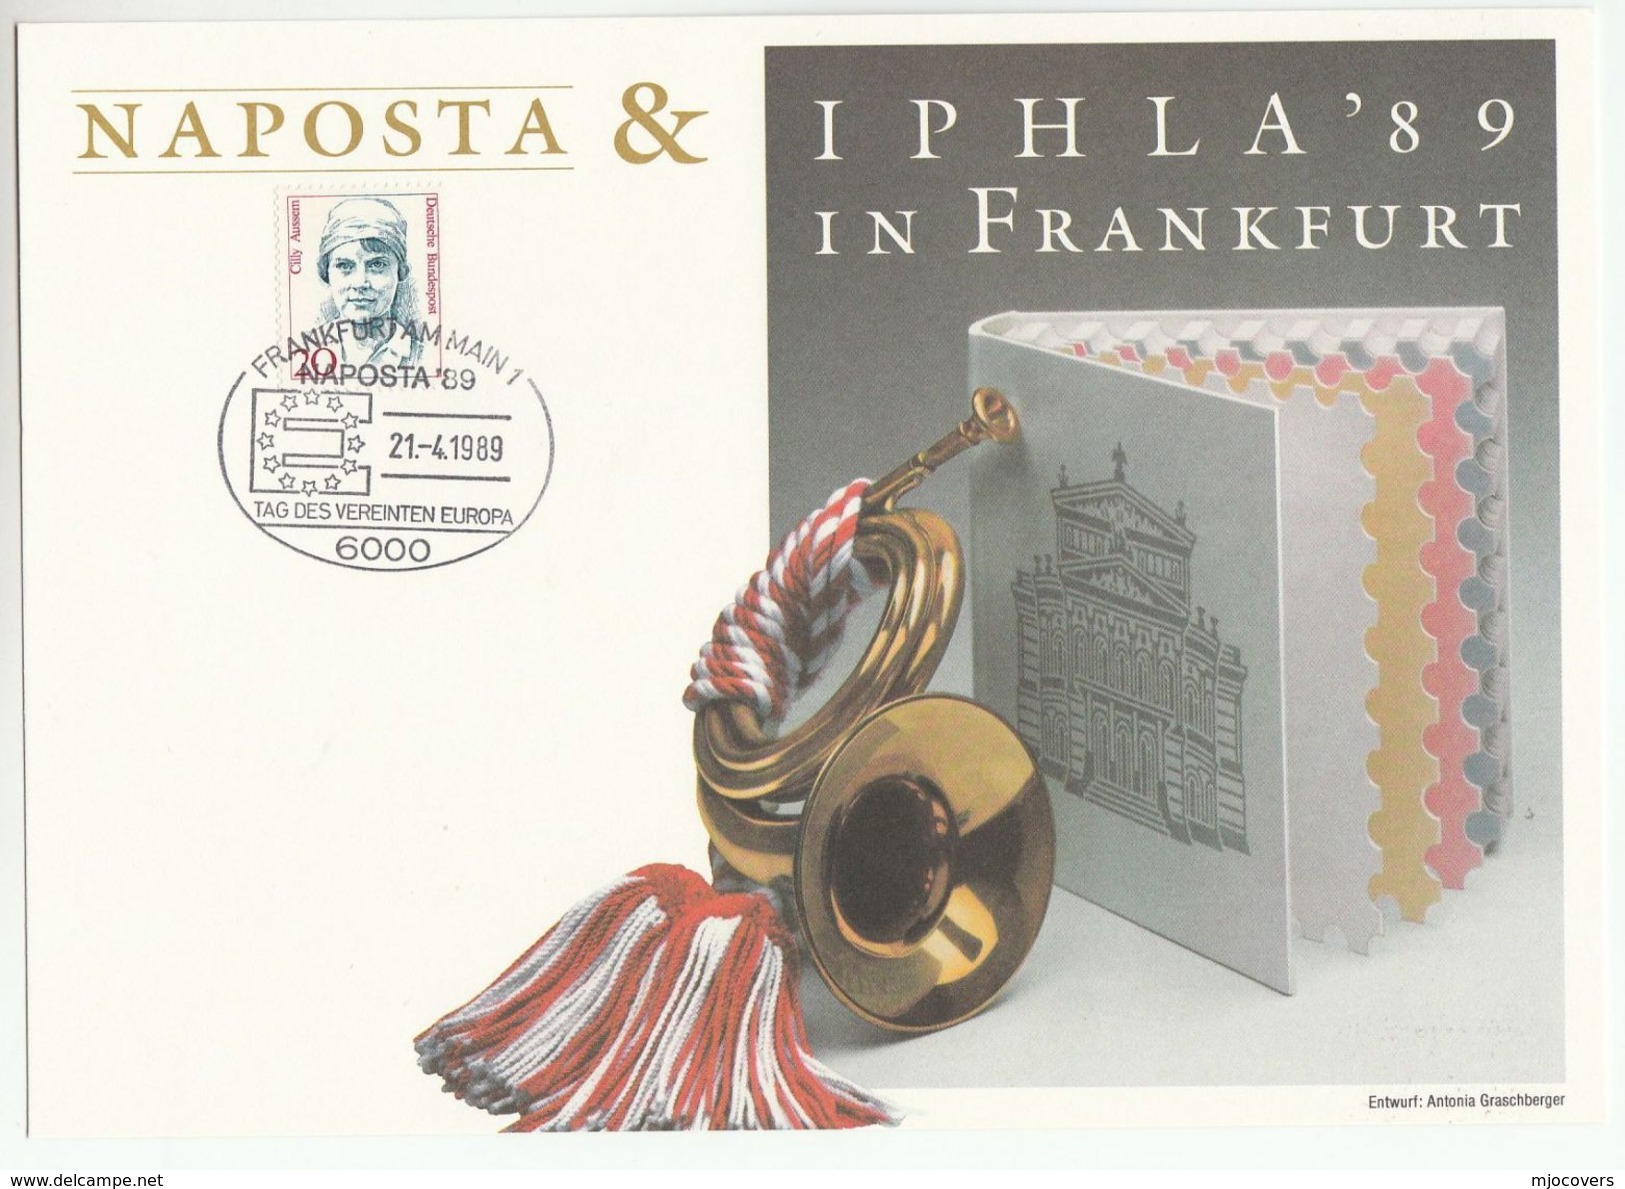 1989 NAPOSTA 'UNITED EUROPE' DAY  EVENT COVER Card GERMANY Philatelic Exhibition, European Community Stamps - European Community